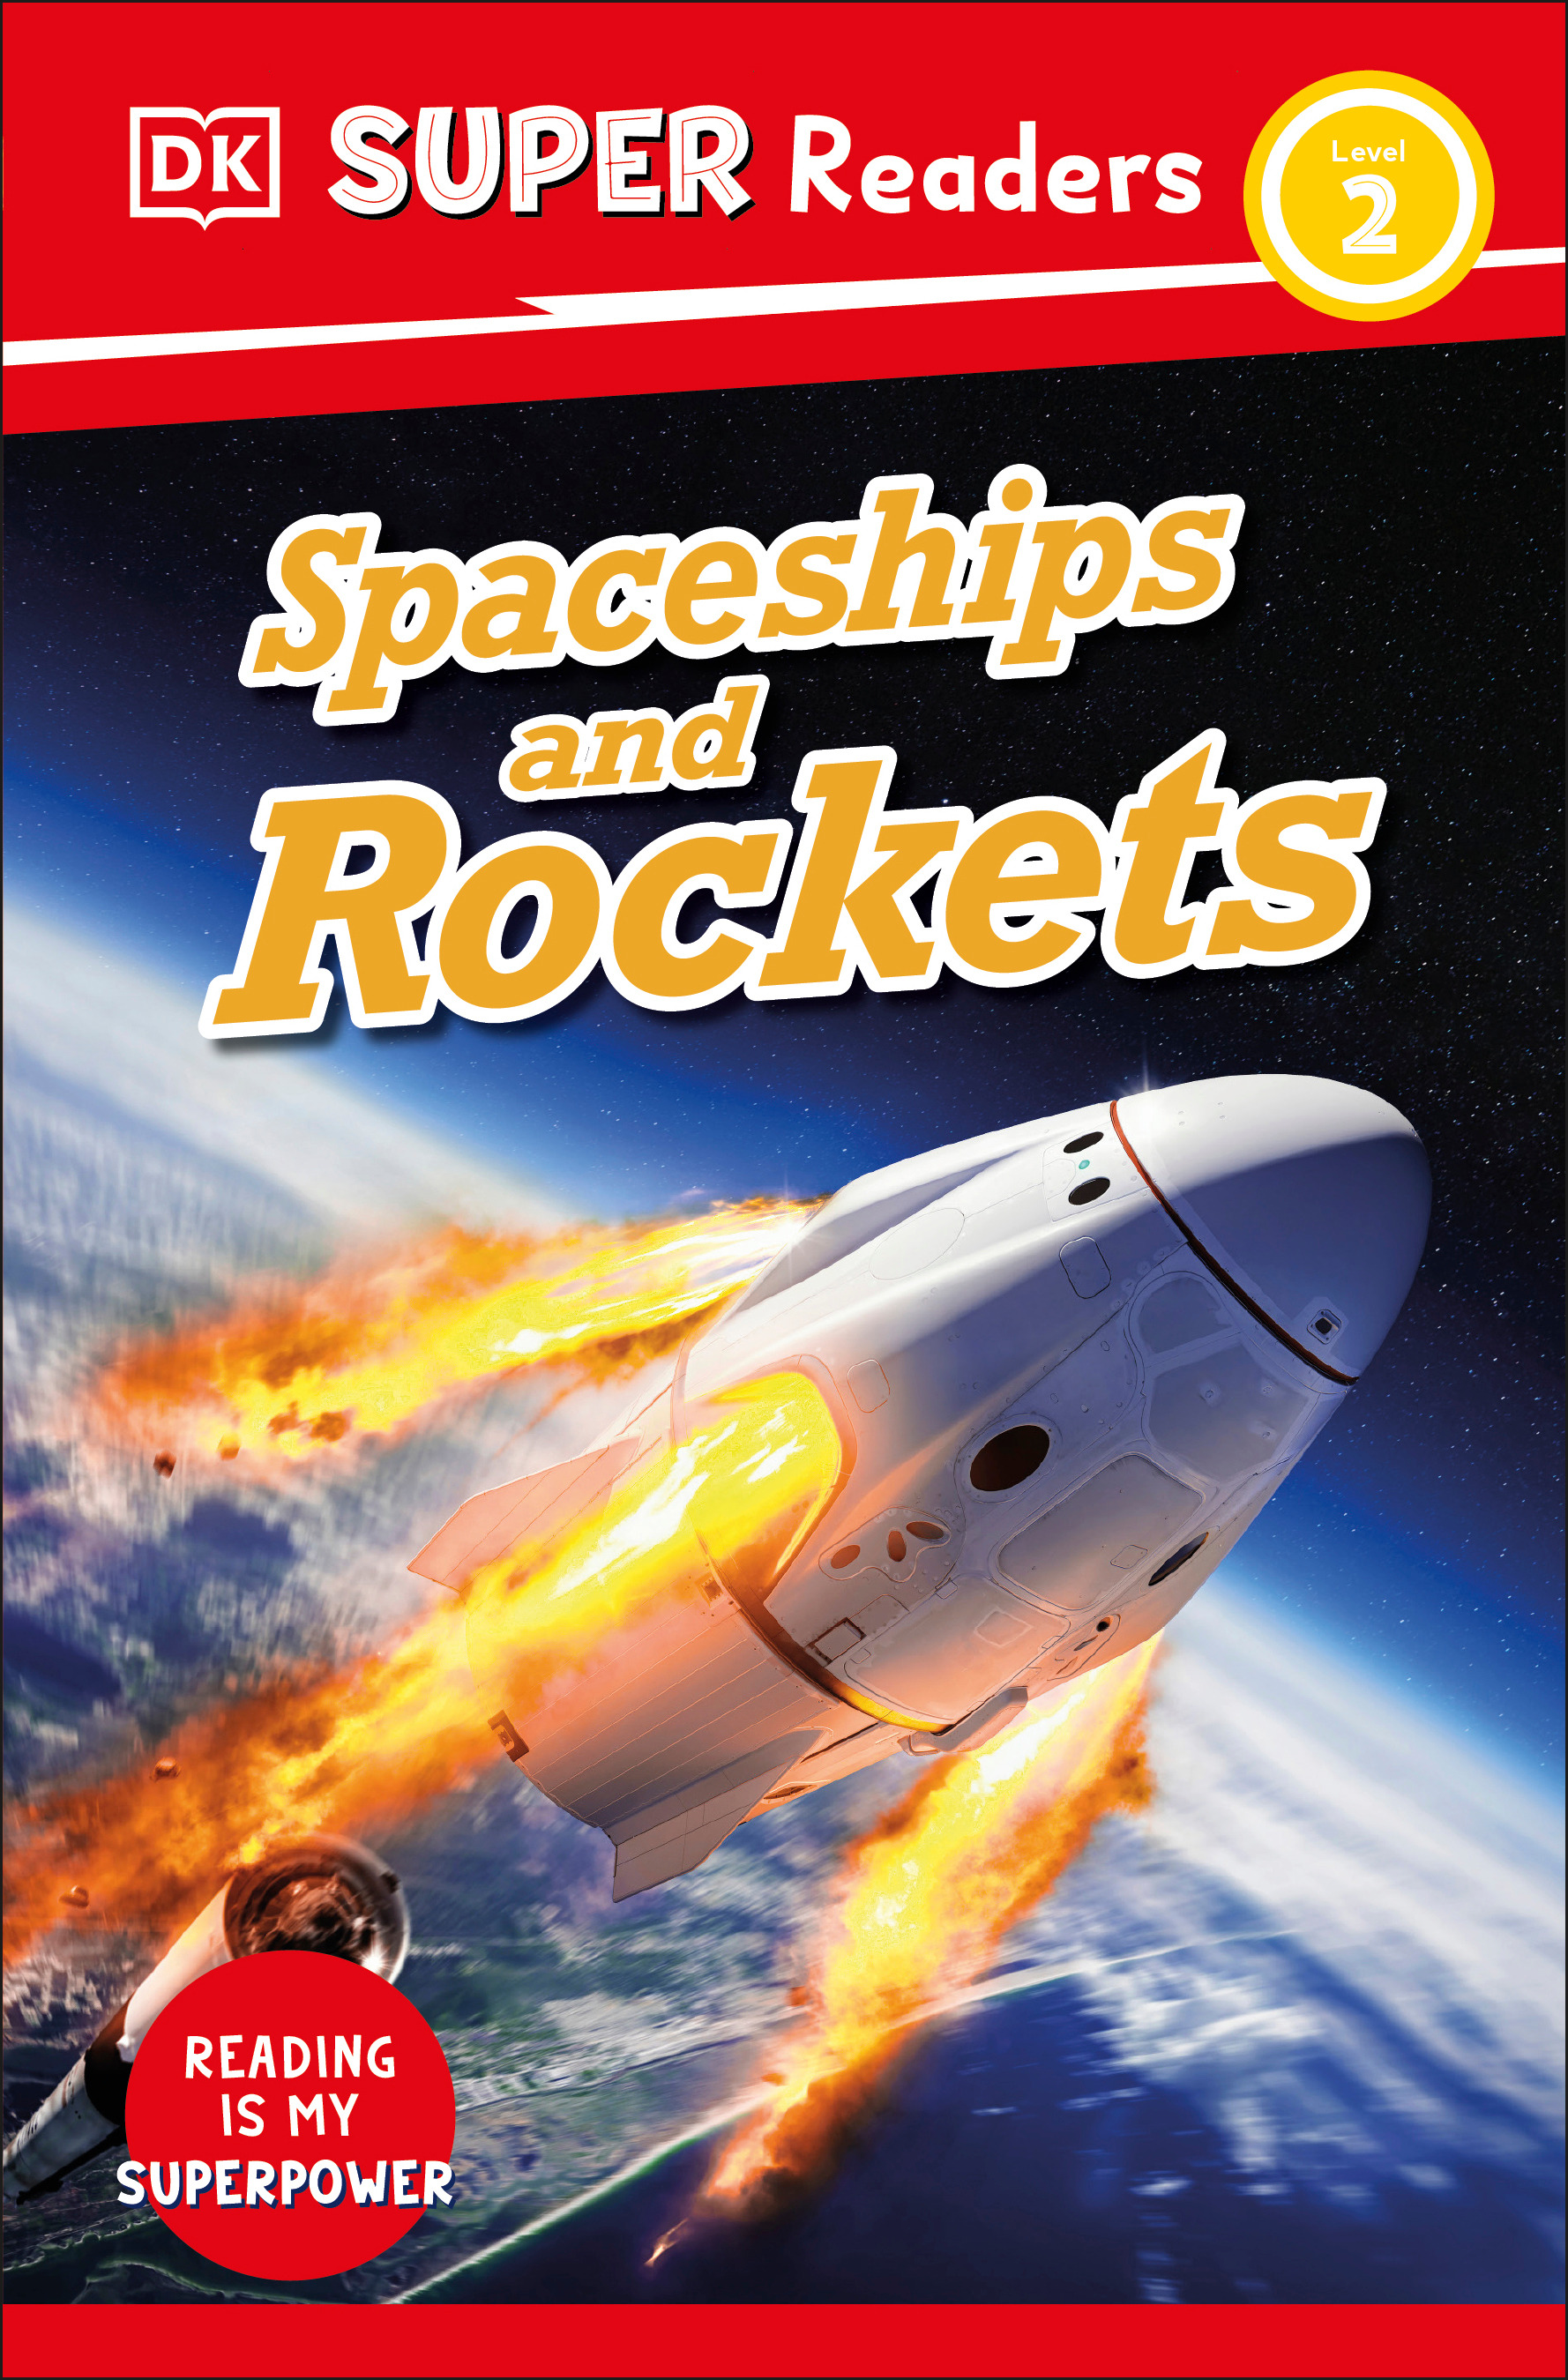 DK Super Readers Level 2 Spaceships and Rockets | 